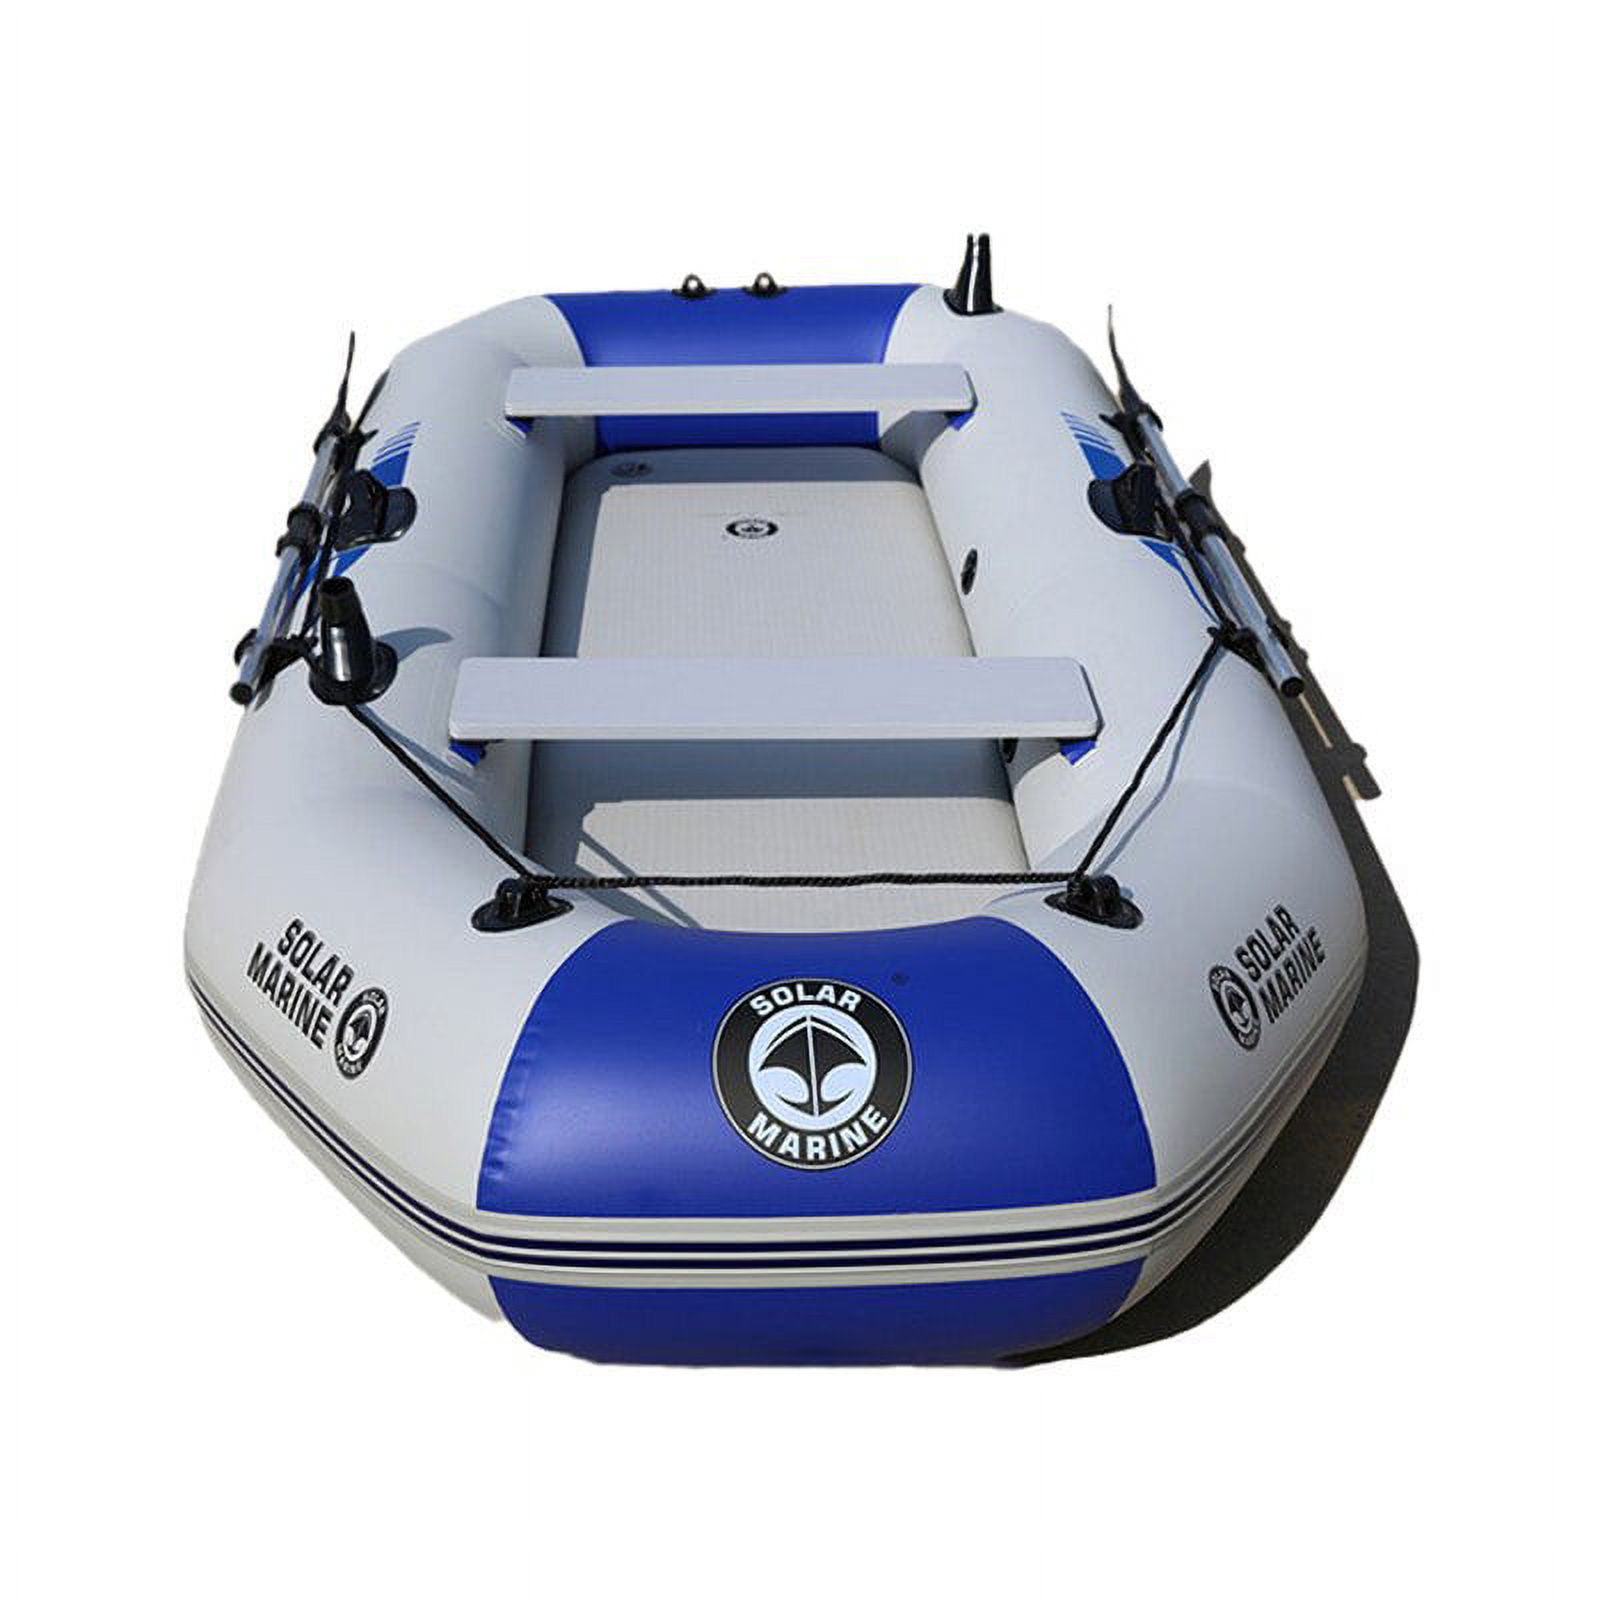 2.6 M 3 Person PVC Portable Inflatable Boat Fishing Kayak Canoe Dinghy Set with Accessories Water Sports - image 4 of 6